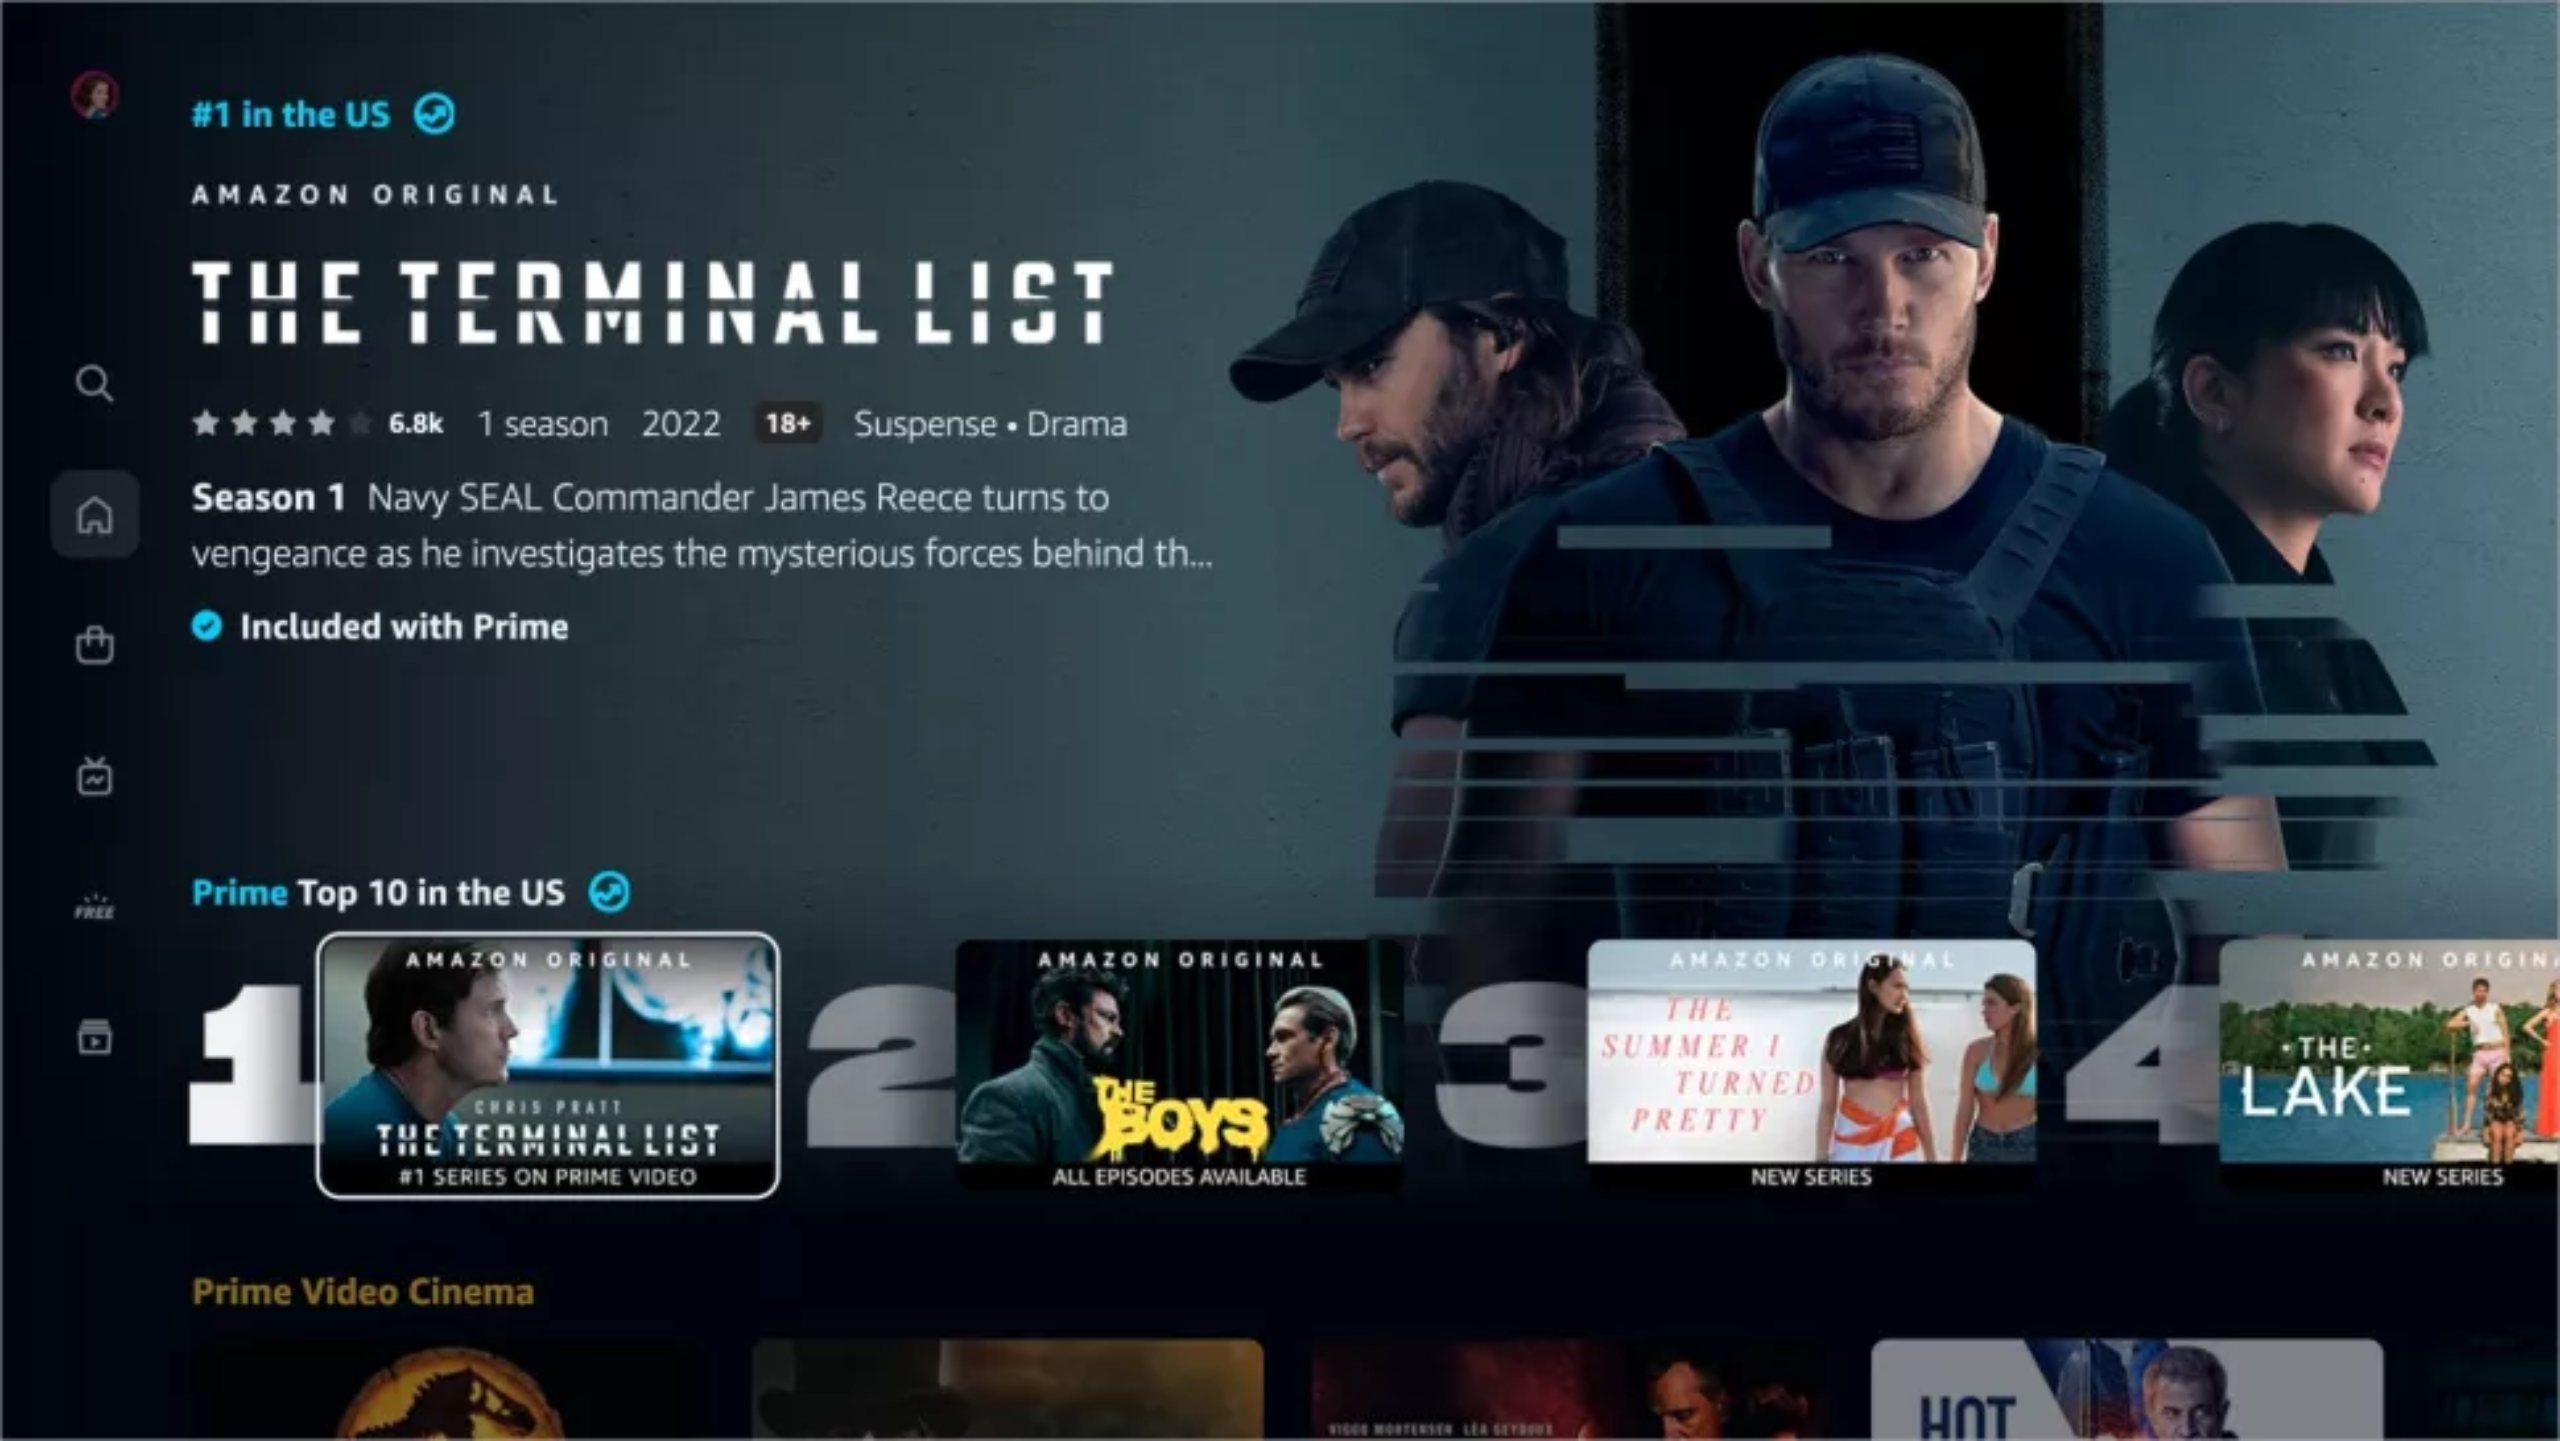 Amazon finally redesigns Prime Video's interface, includes new menu